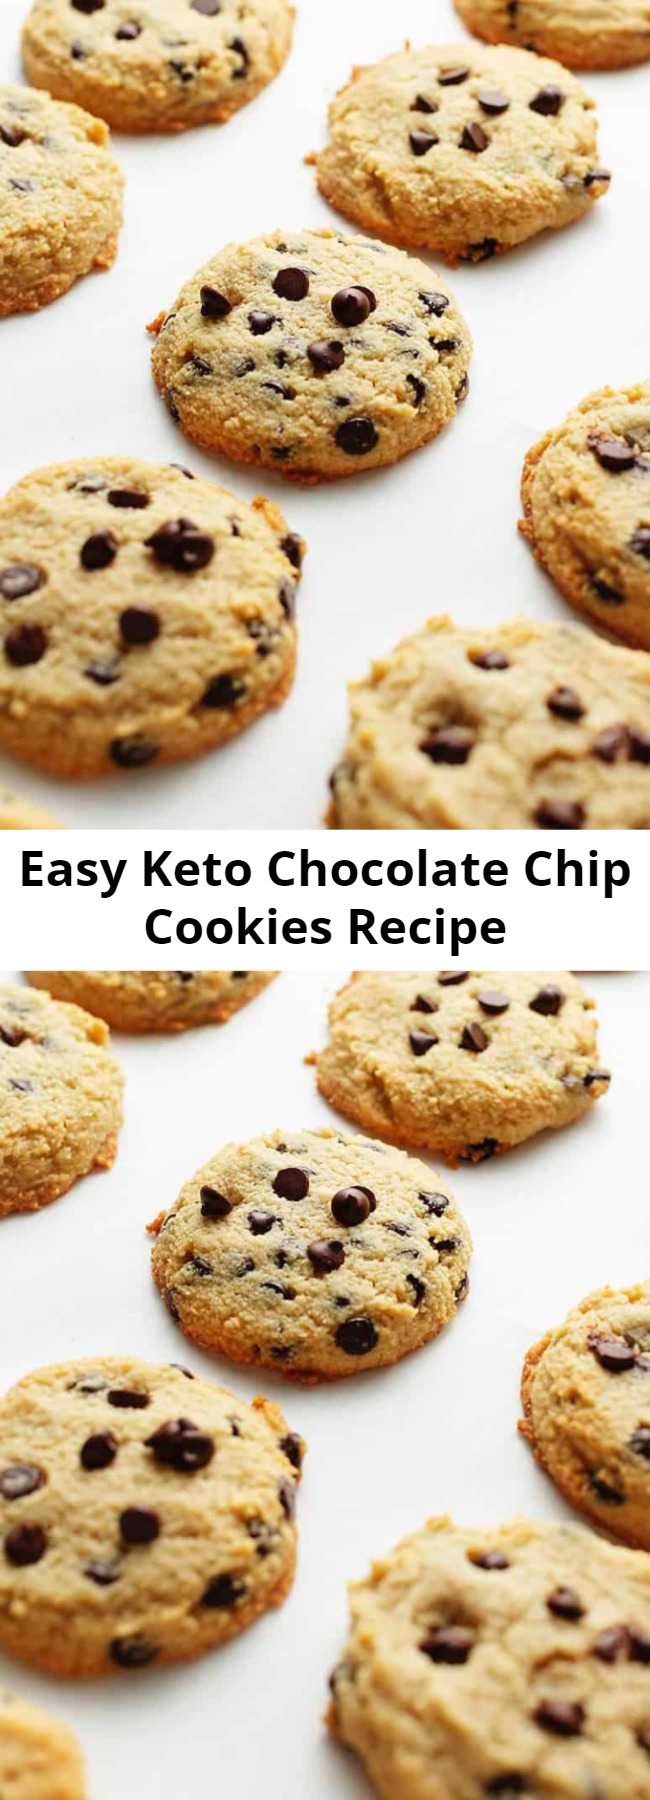 Easy Keto Chocolate Chip Cookies Recipe - These keto chocolate chip keto cookies are low carb, gluten free, amazingly delicious, and kid approved! Easy to make with only 1 bowl and 2 net carbs per cookie! These are truly no fuss. You can literally dump everything in the mixing bowl and they will turn out perfect every time.